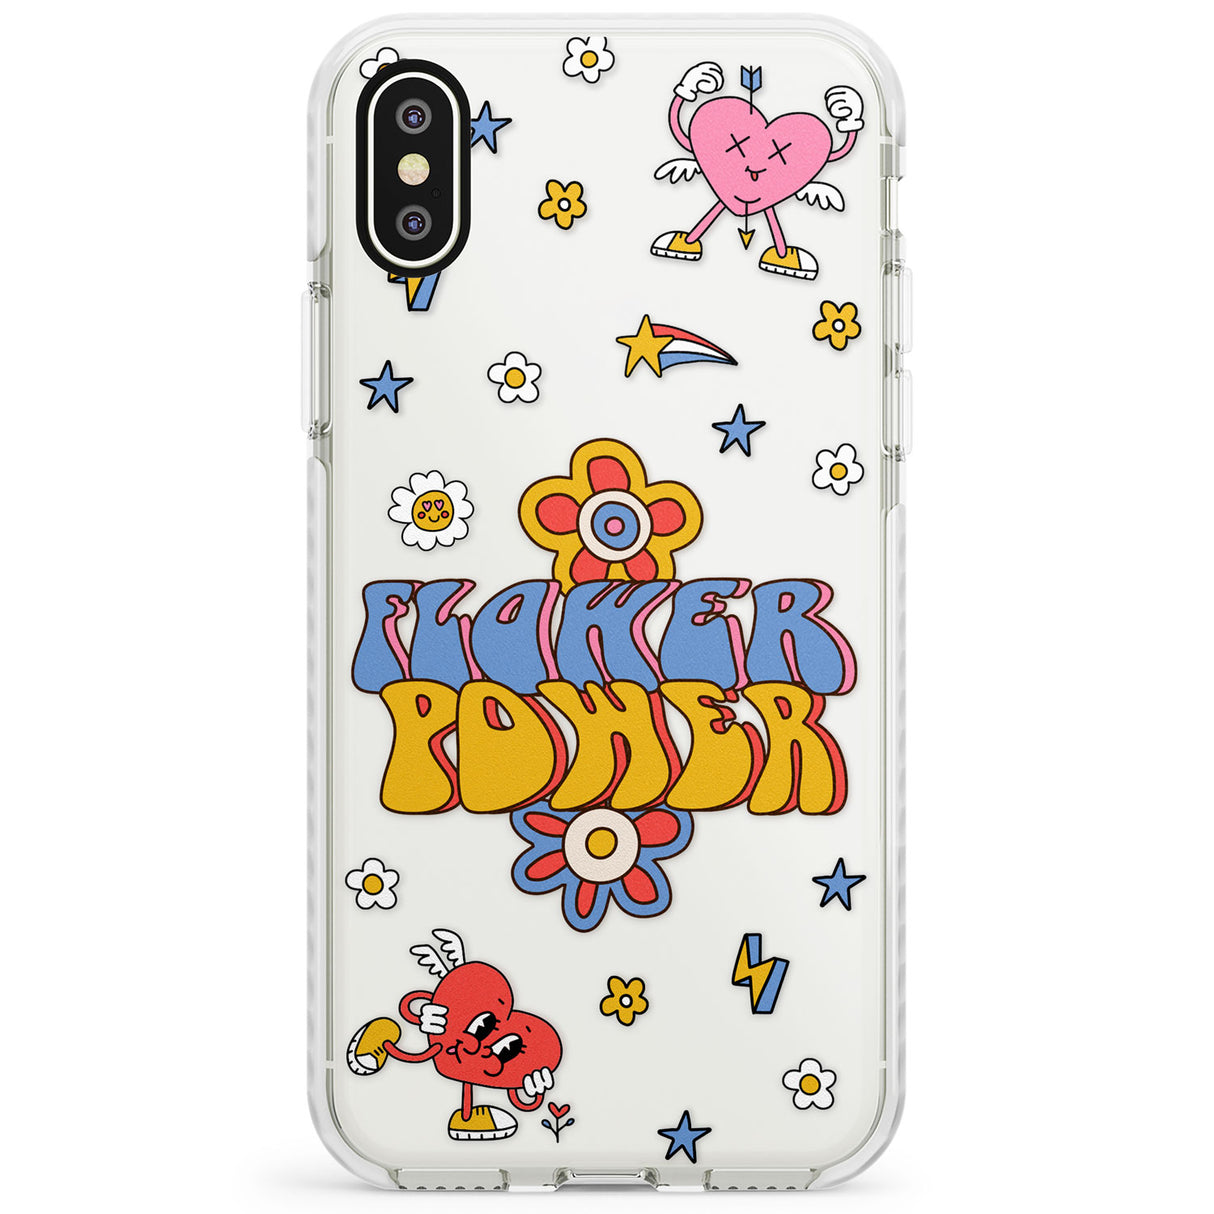 Flower Power Impact Phone Case for iPhone X XS Max XR